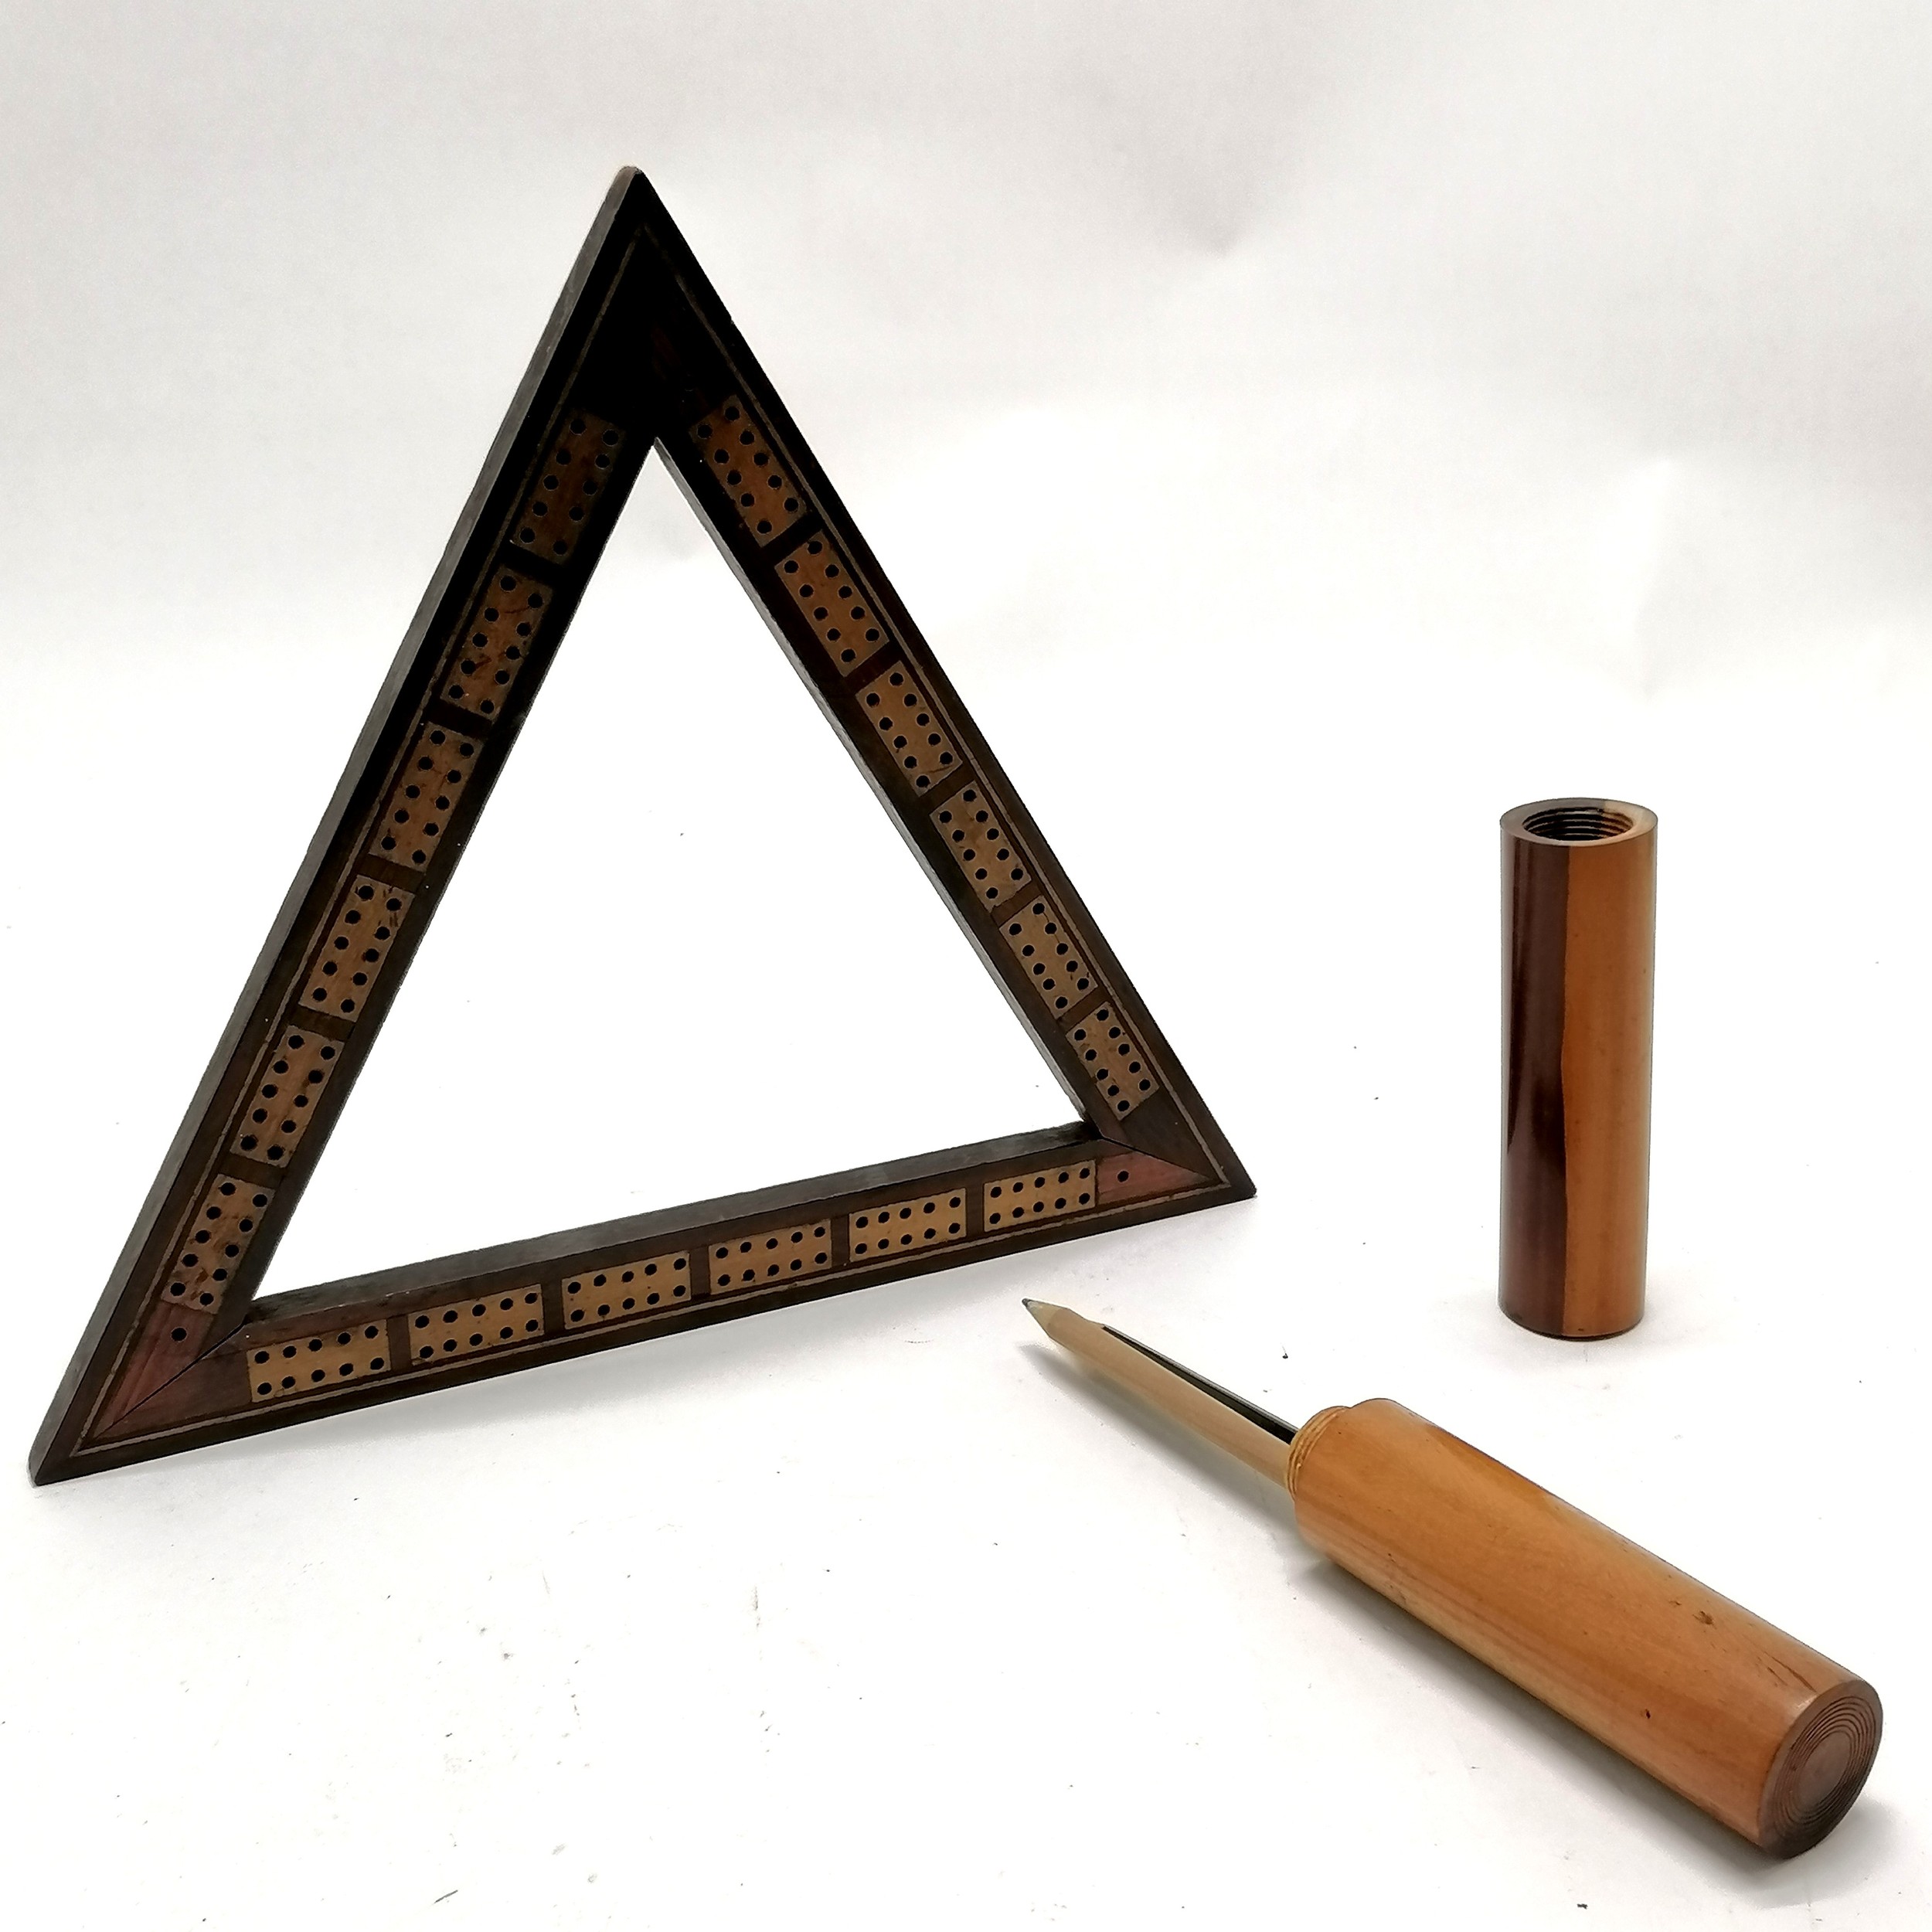 Antique triangular cribbage board with parquetry detail - 27.5cm across t/w turned wooden pencil box - Image 3 of 3